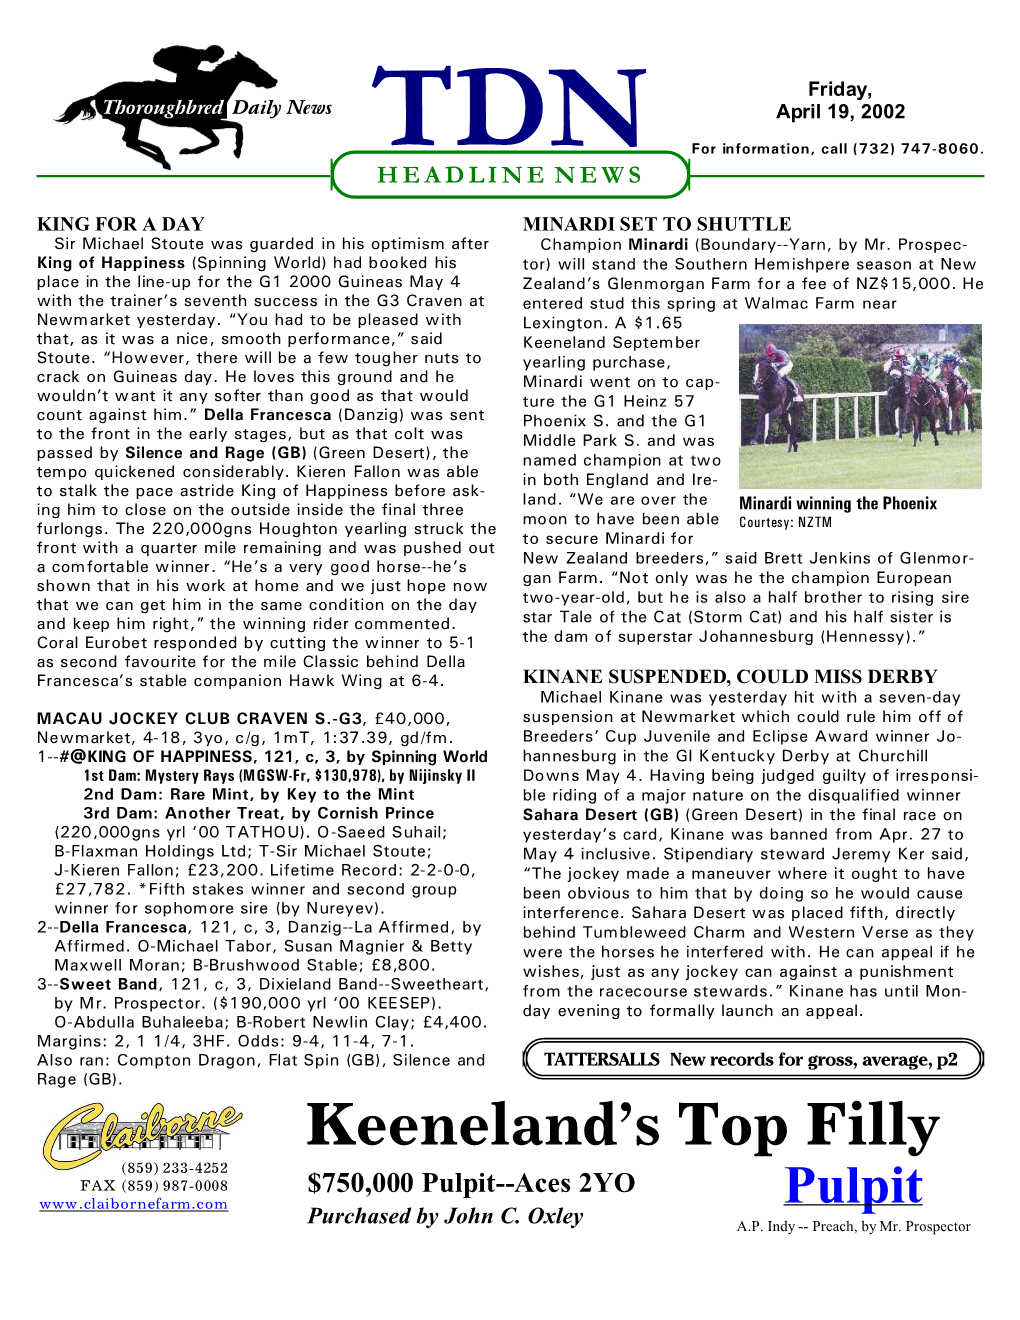 Keeneland's Top Filly